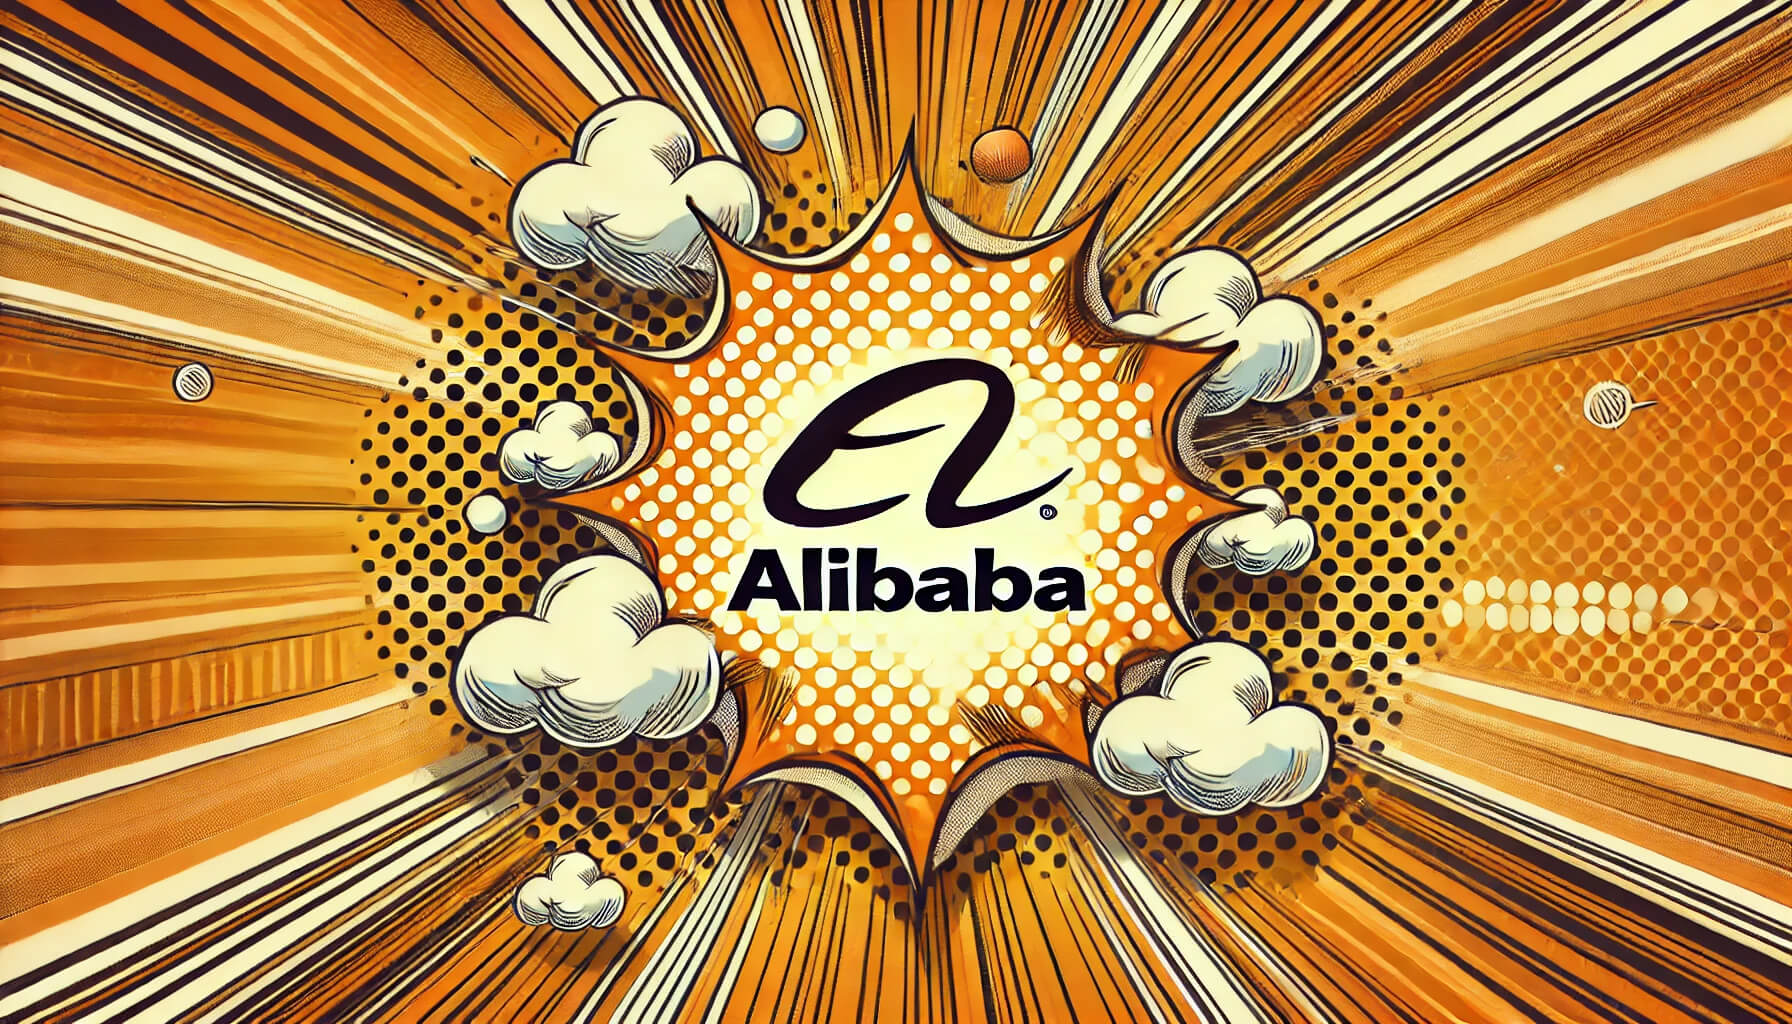 Alibaba Stock Analysis: Strategic Investments and Strong Financials